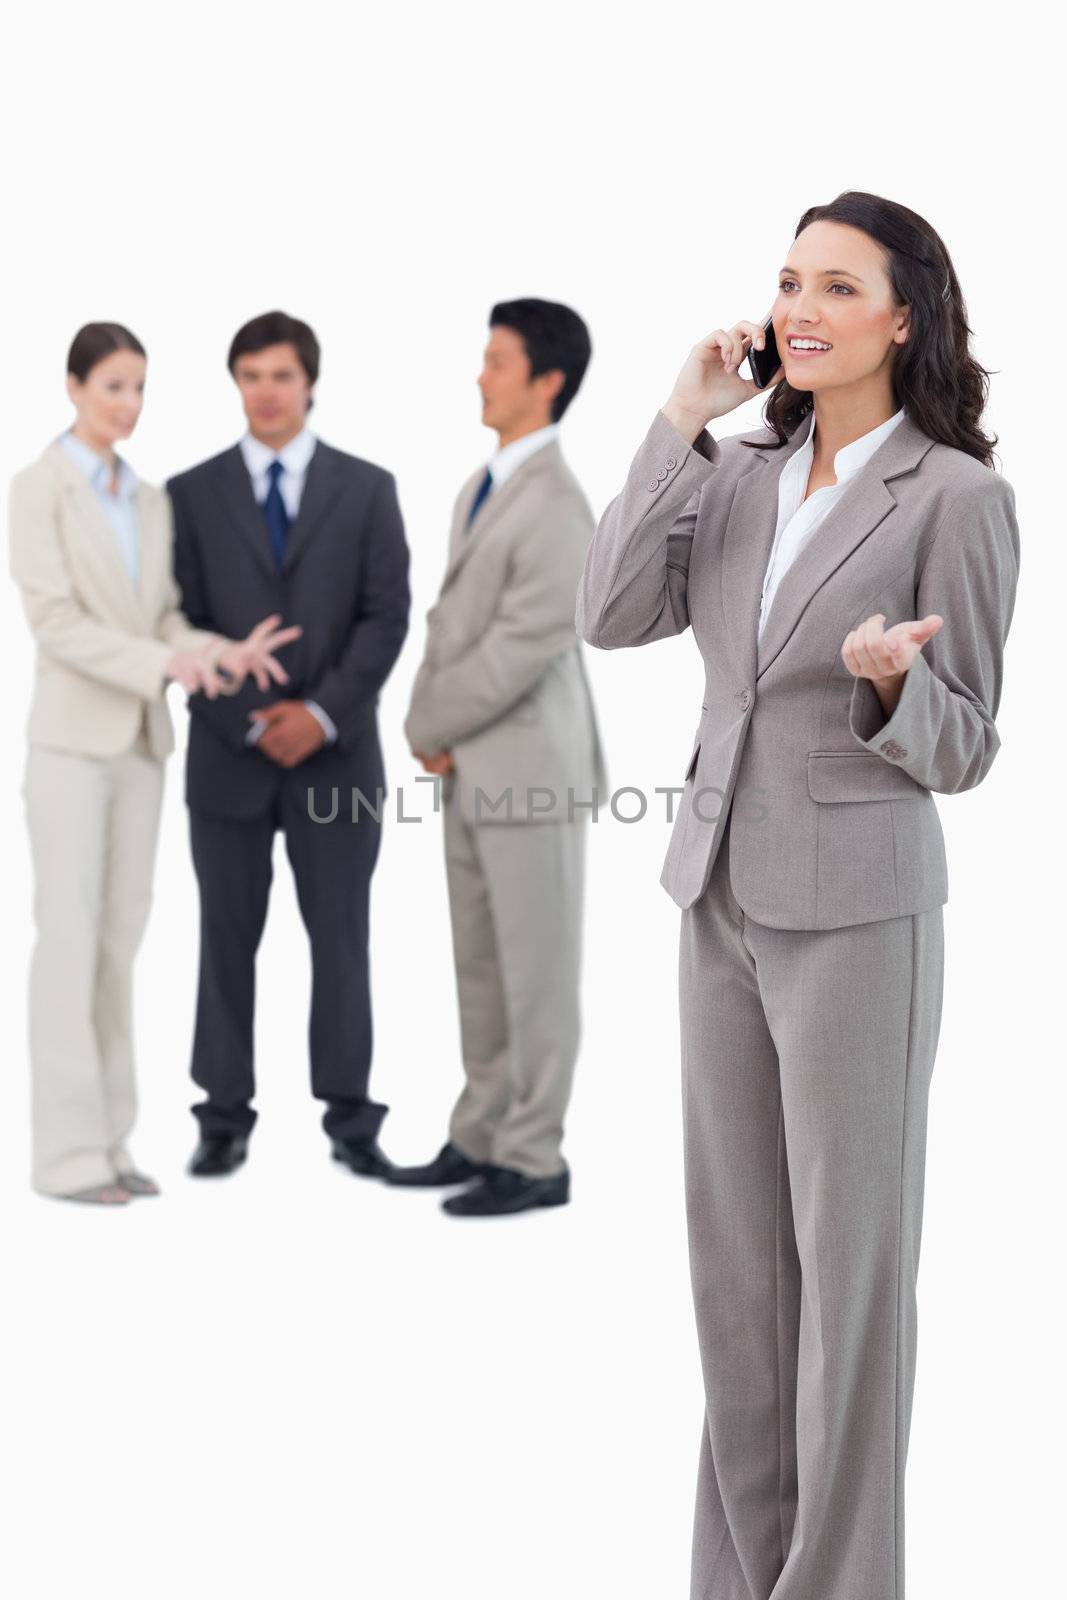 Saleswoman talking on cellphone with colleagues behind her by Wavebreakmedia